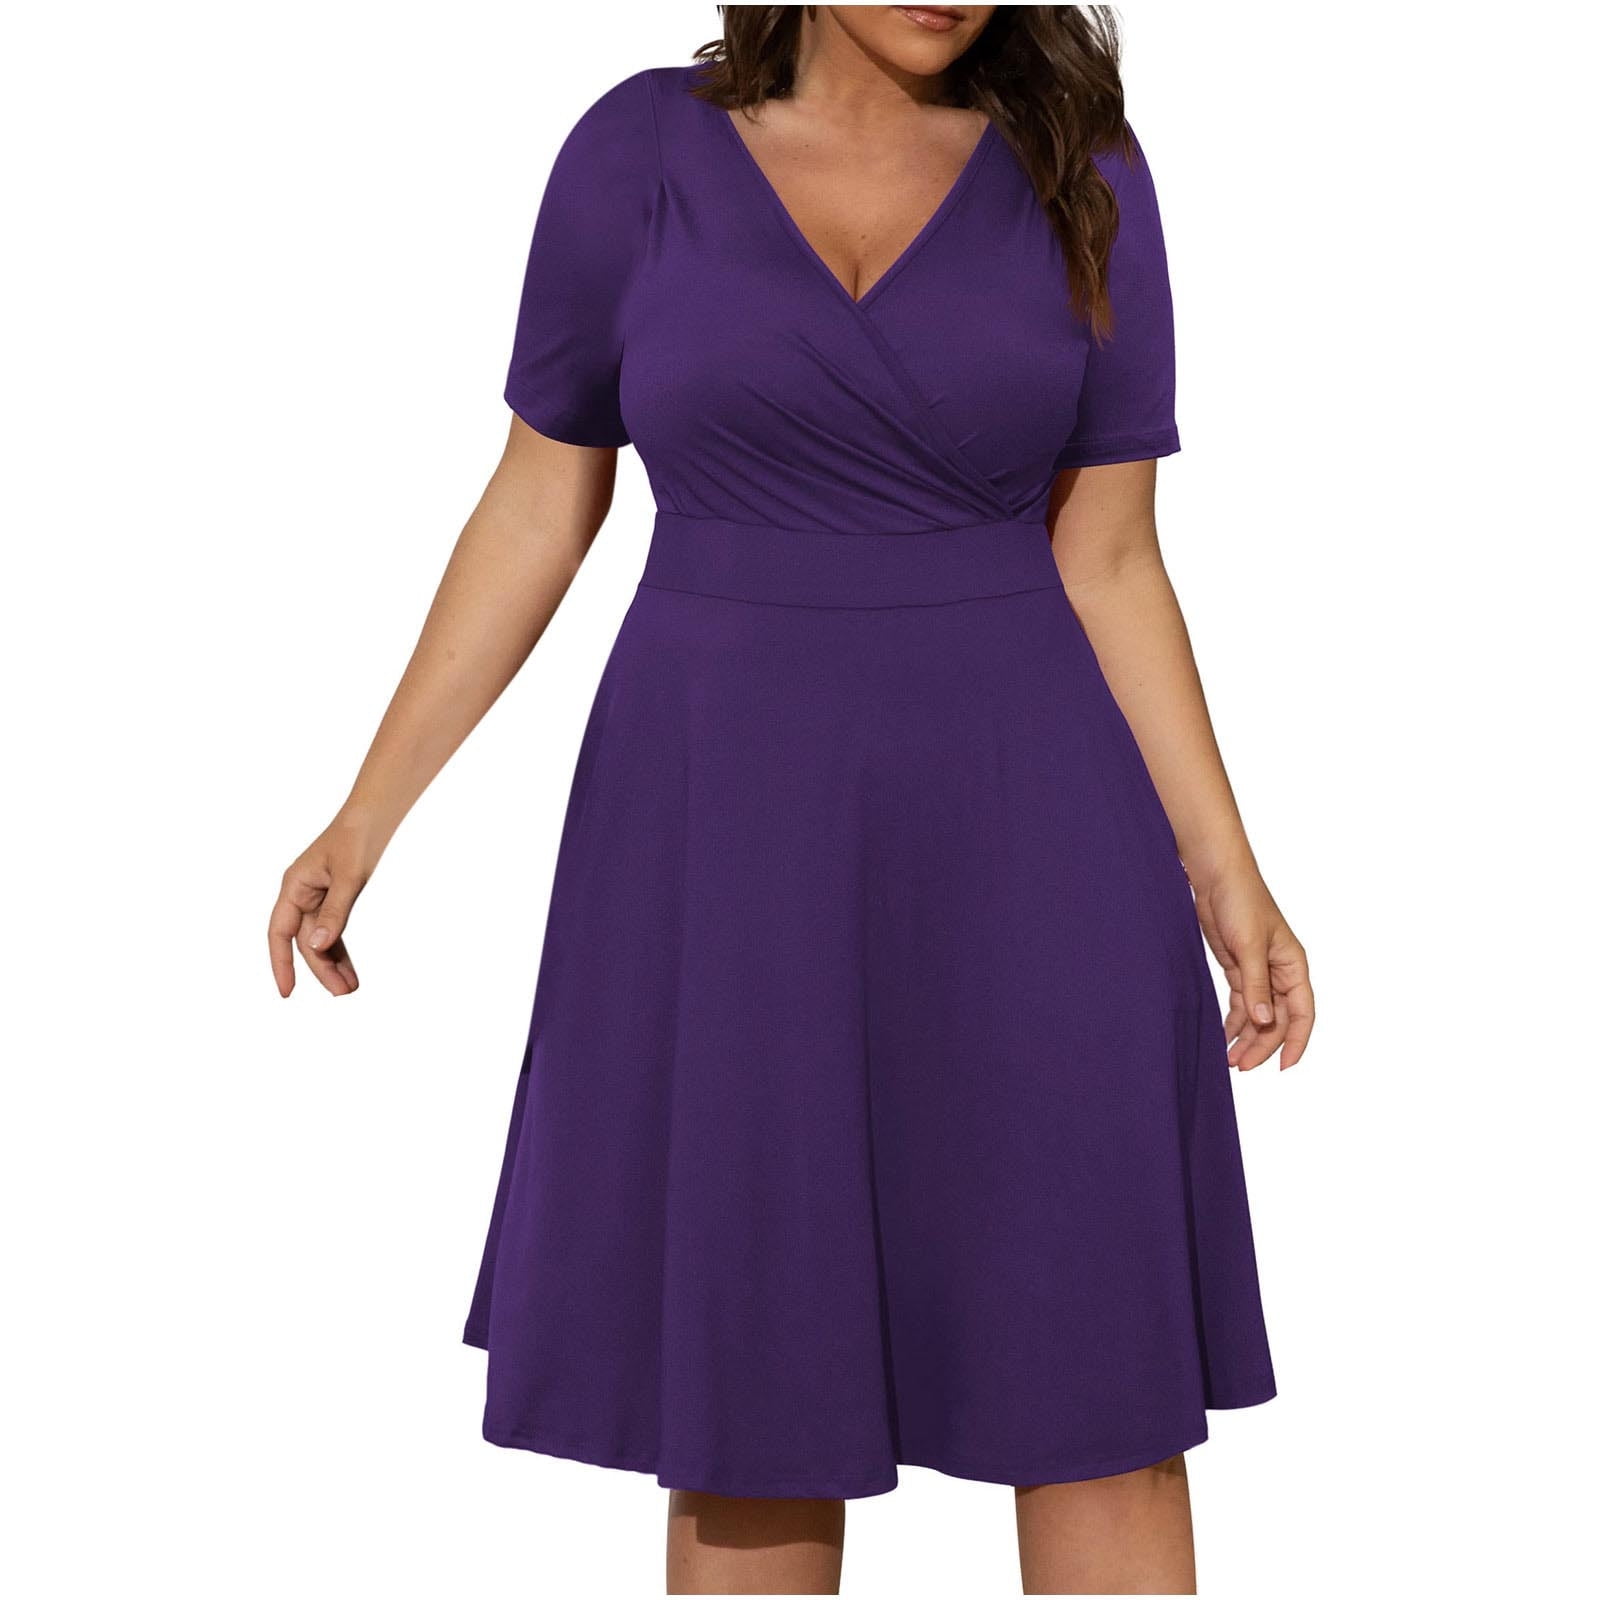 Plus Size Dresses for Curvy Women Womens Casual Plus Size V-Neck Solid  Short Sleeve Boho Dress Dress With Pockets Clearance 